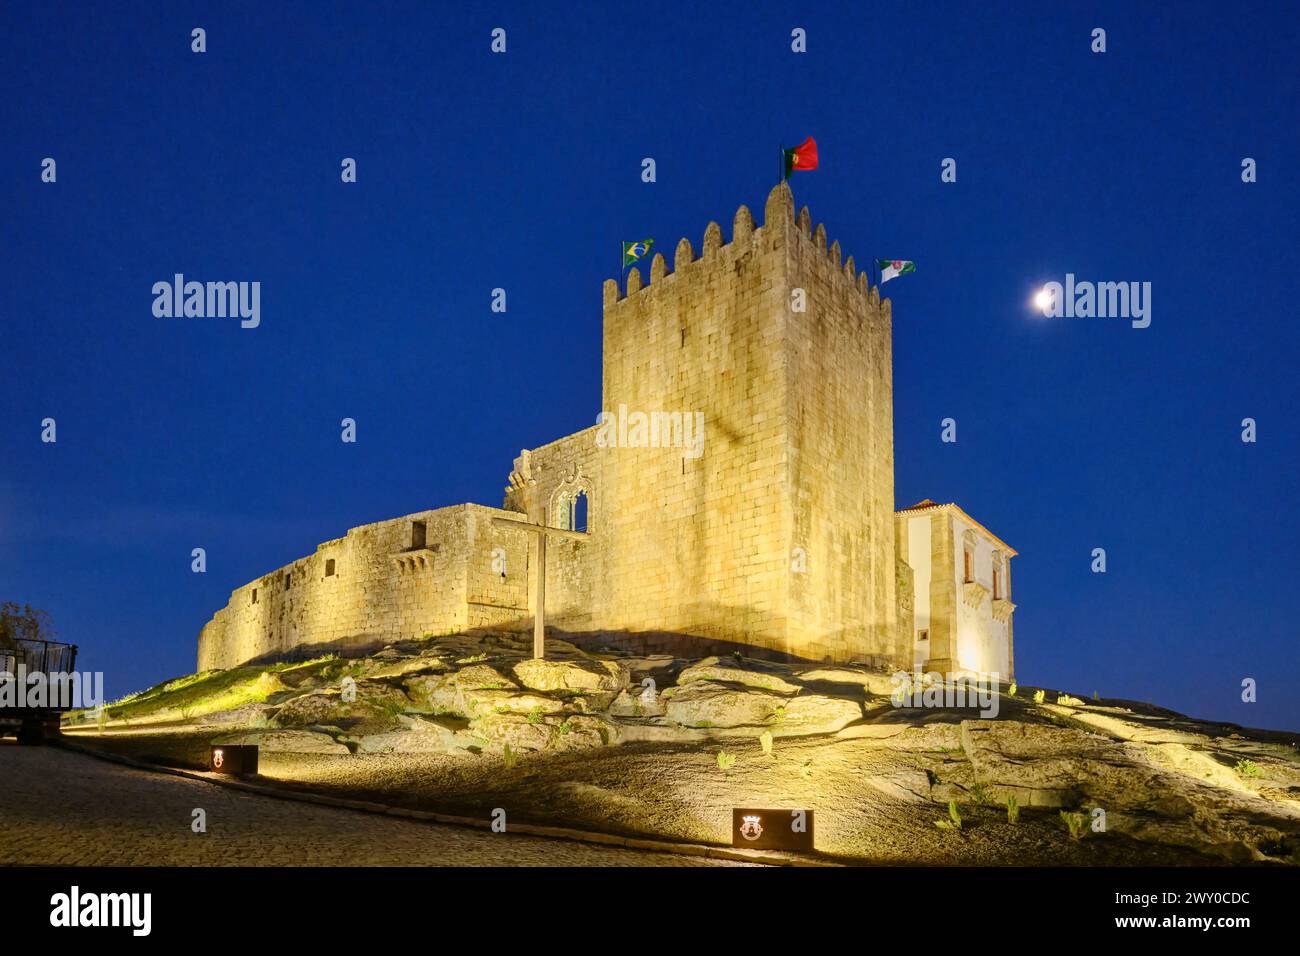 The castle of Belmonte dating back to 13th century. Beira Baixa, Portugal Stock Photo